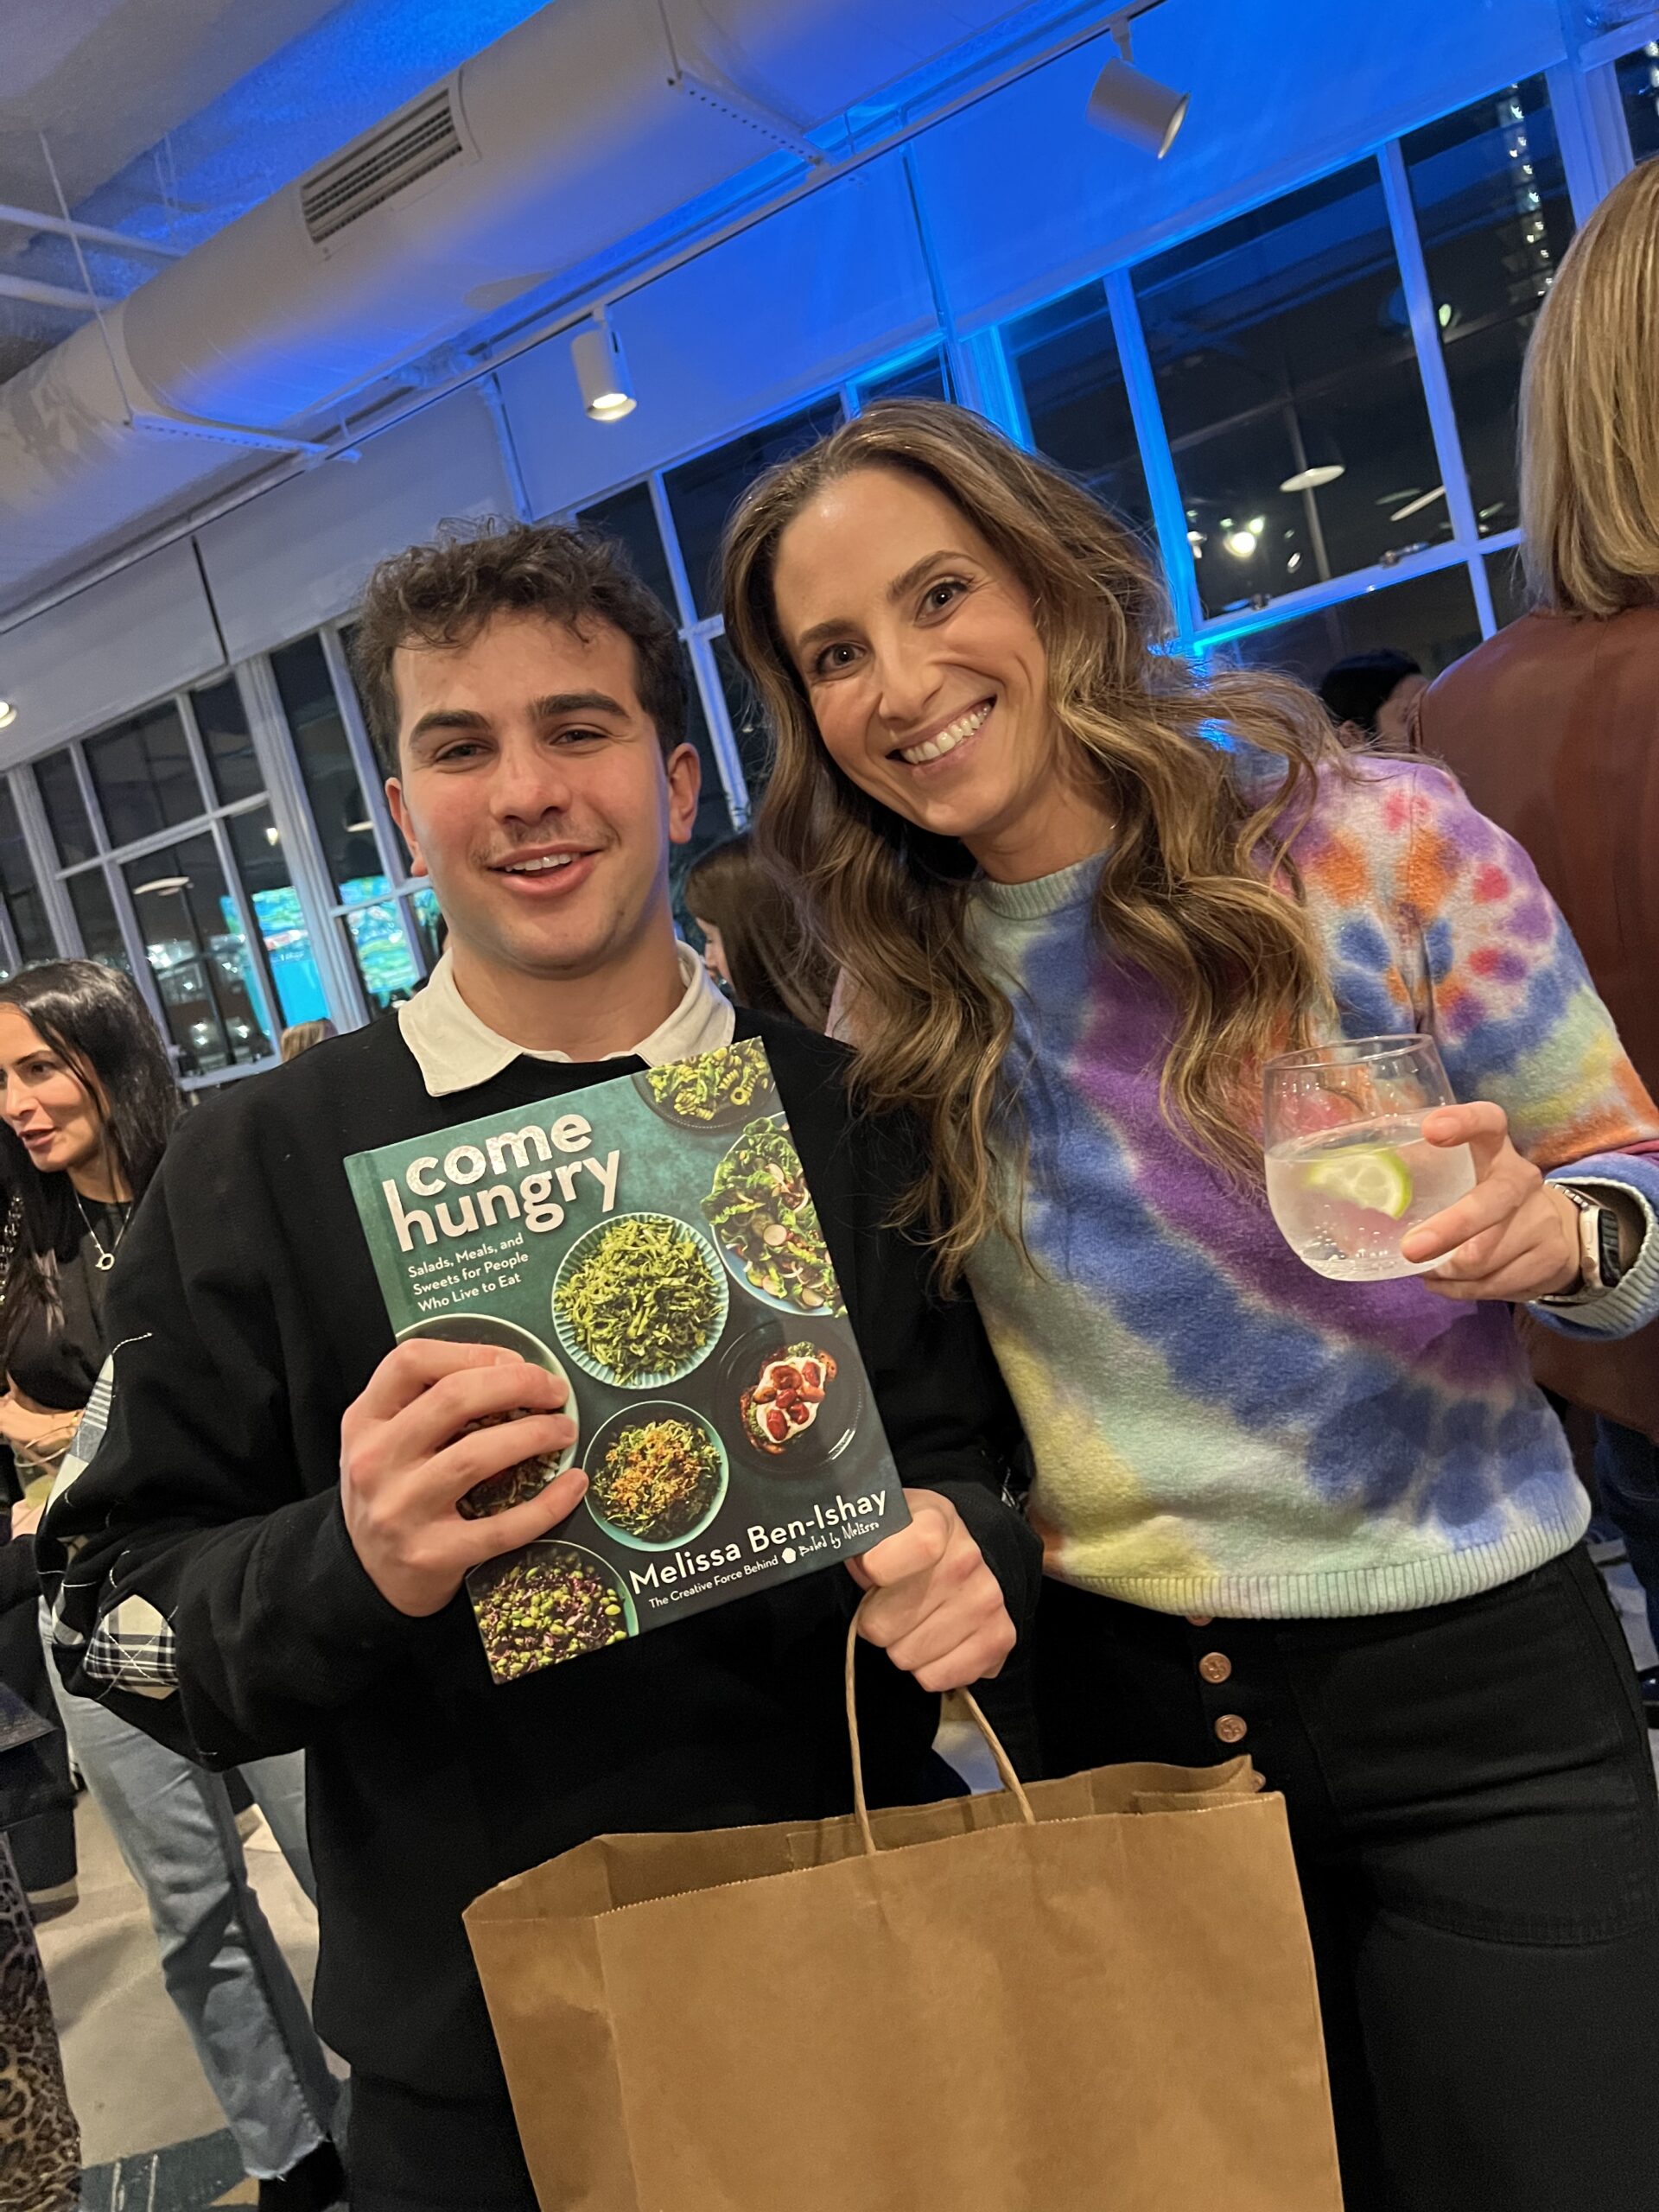 Matthew Merril’s Sweet Adventure at Baked by Melissa’s Book Launch Event in New York